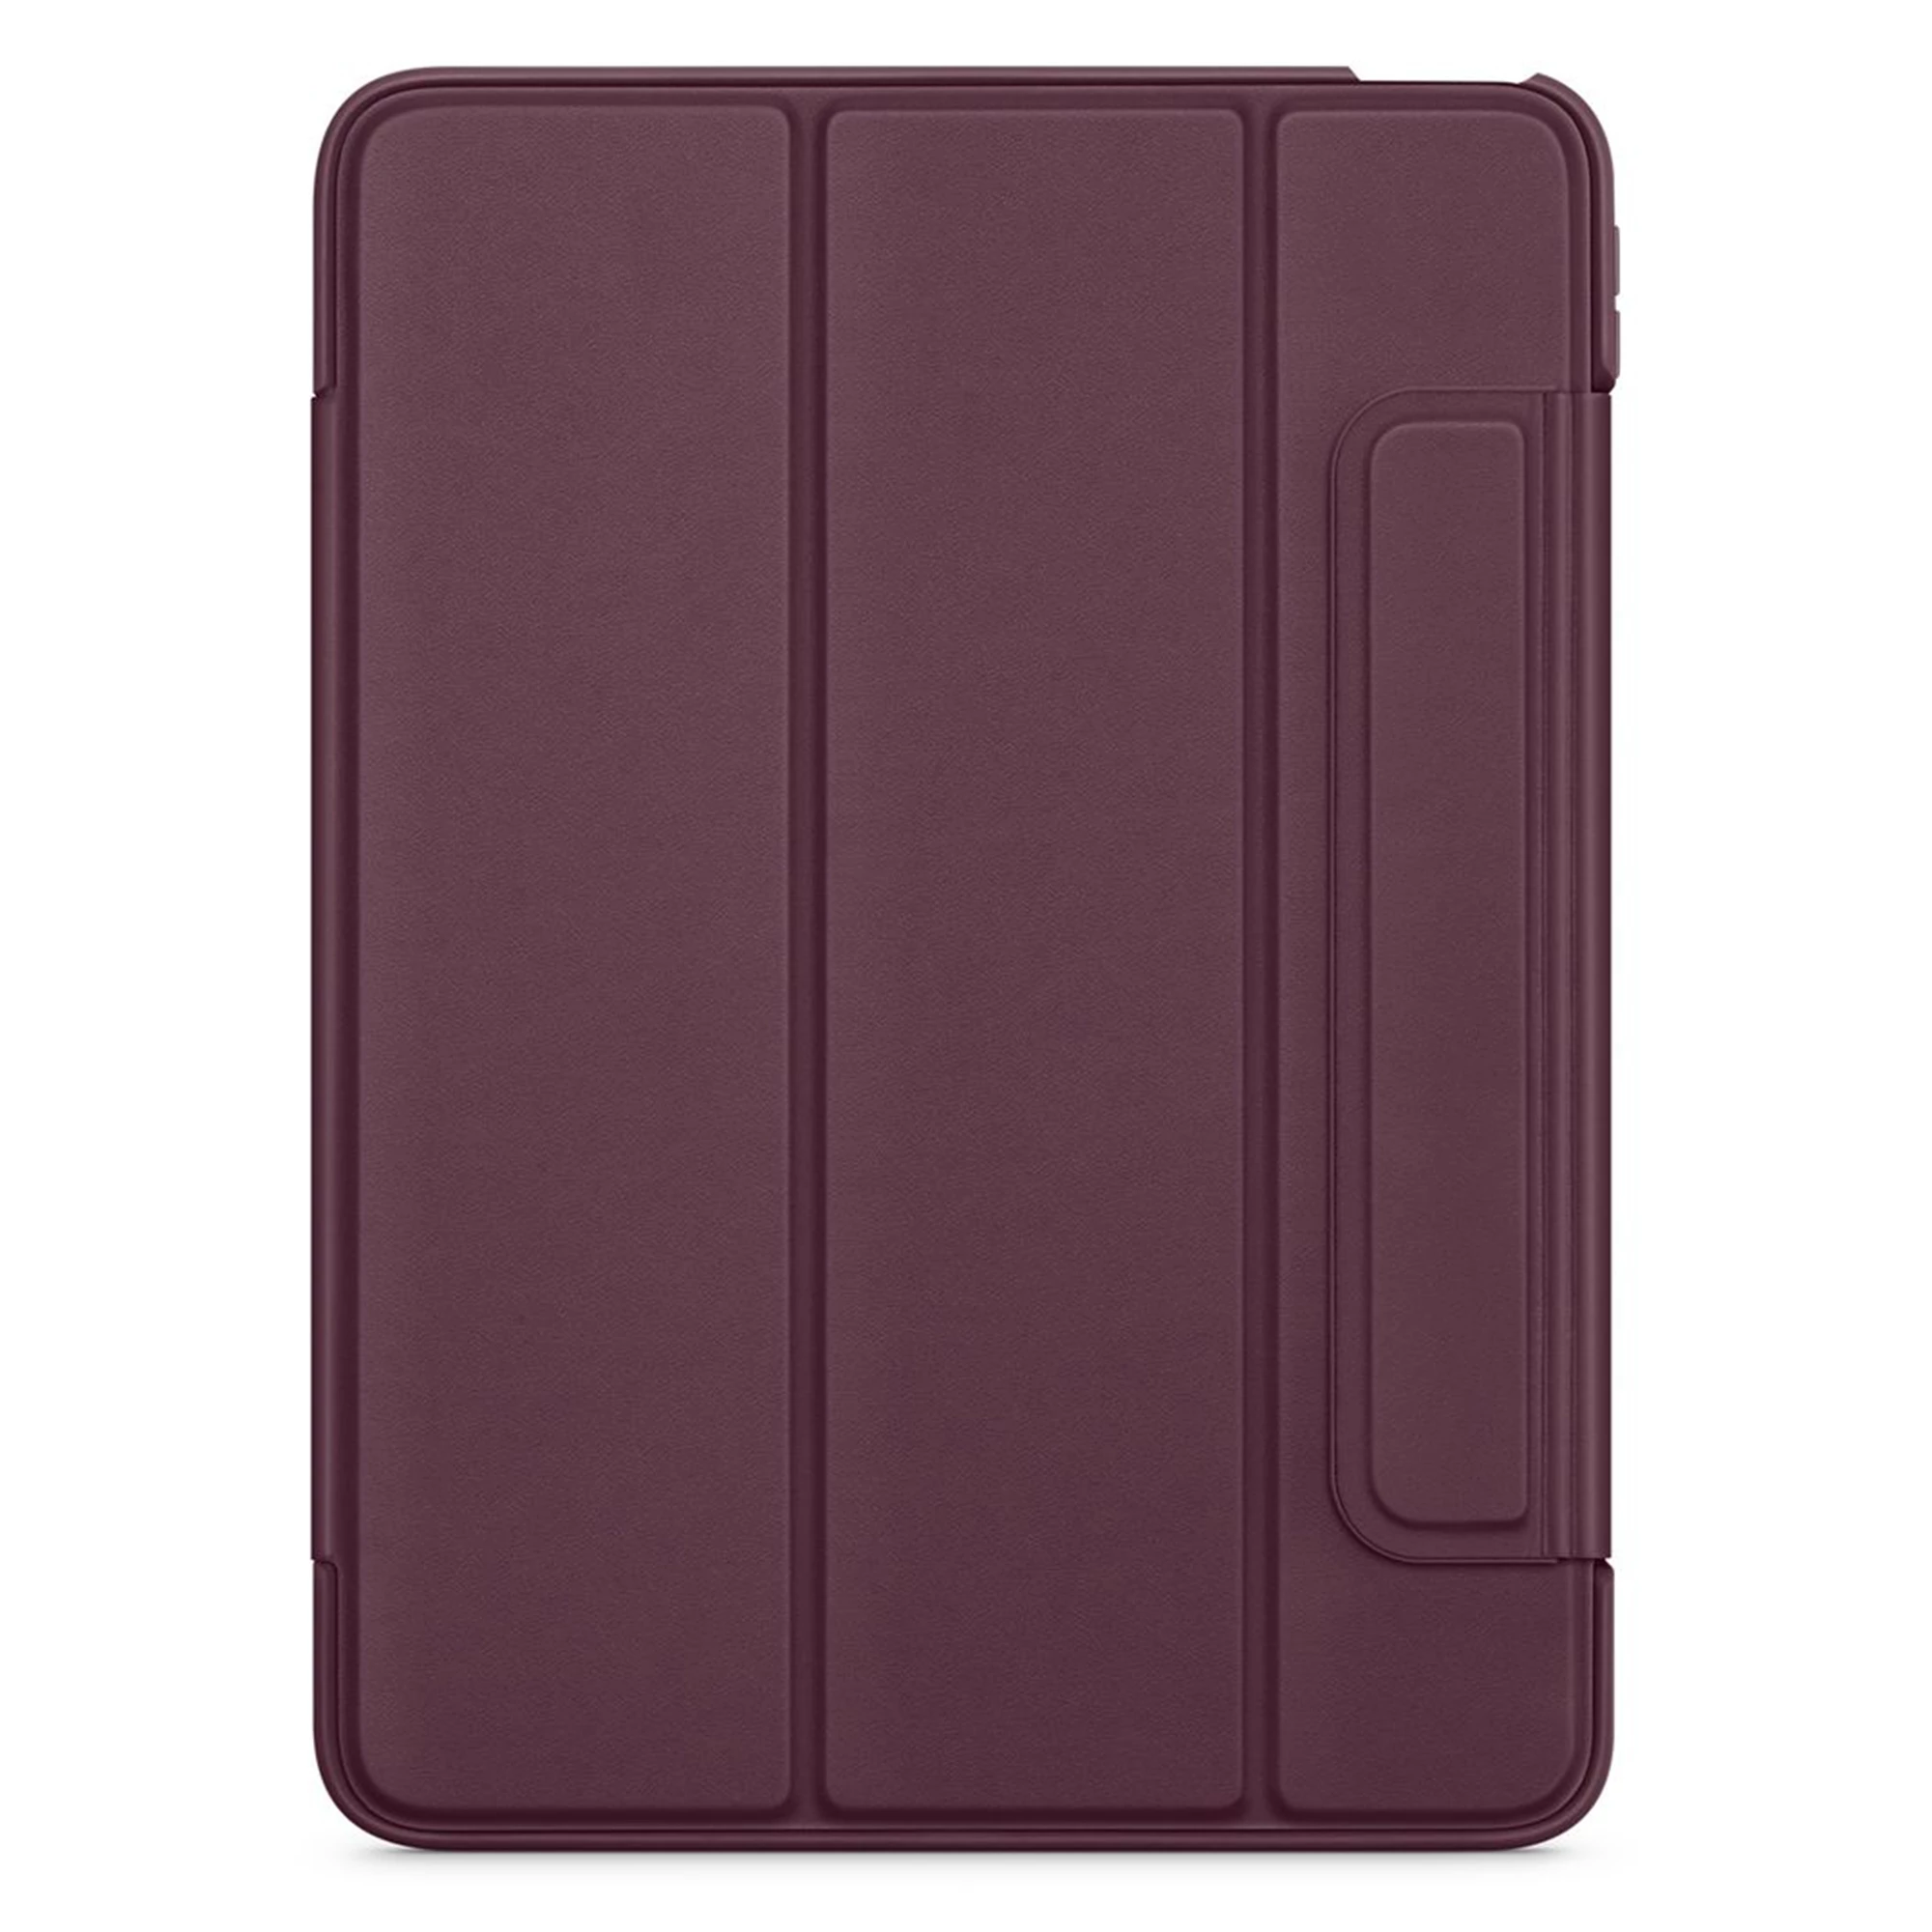 OtterBox Symmetry Series 360 Folio Case for iPad Air (4th and 5th generation) - Purple (HPBB2)